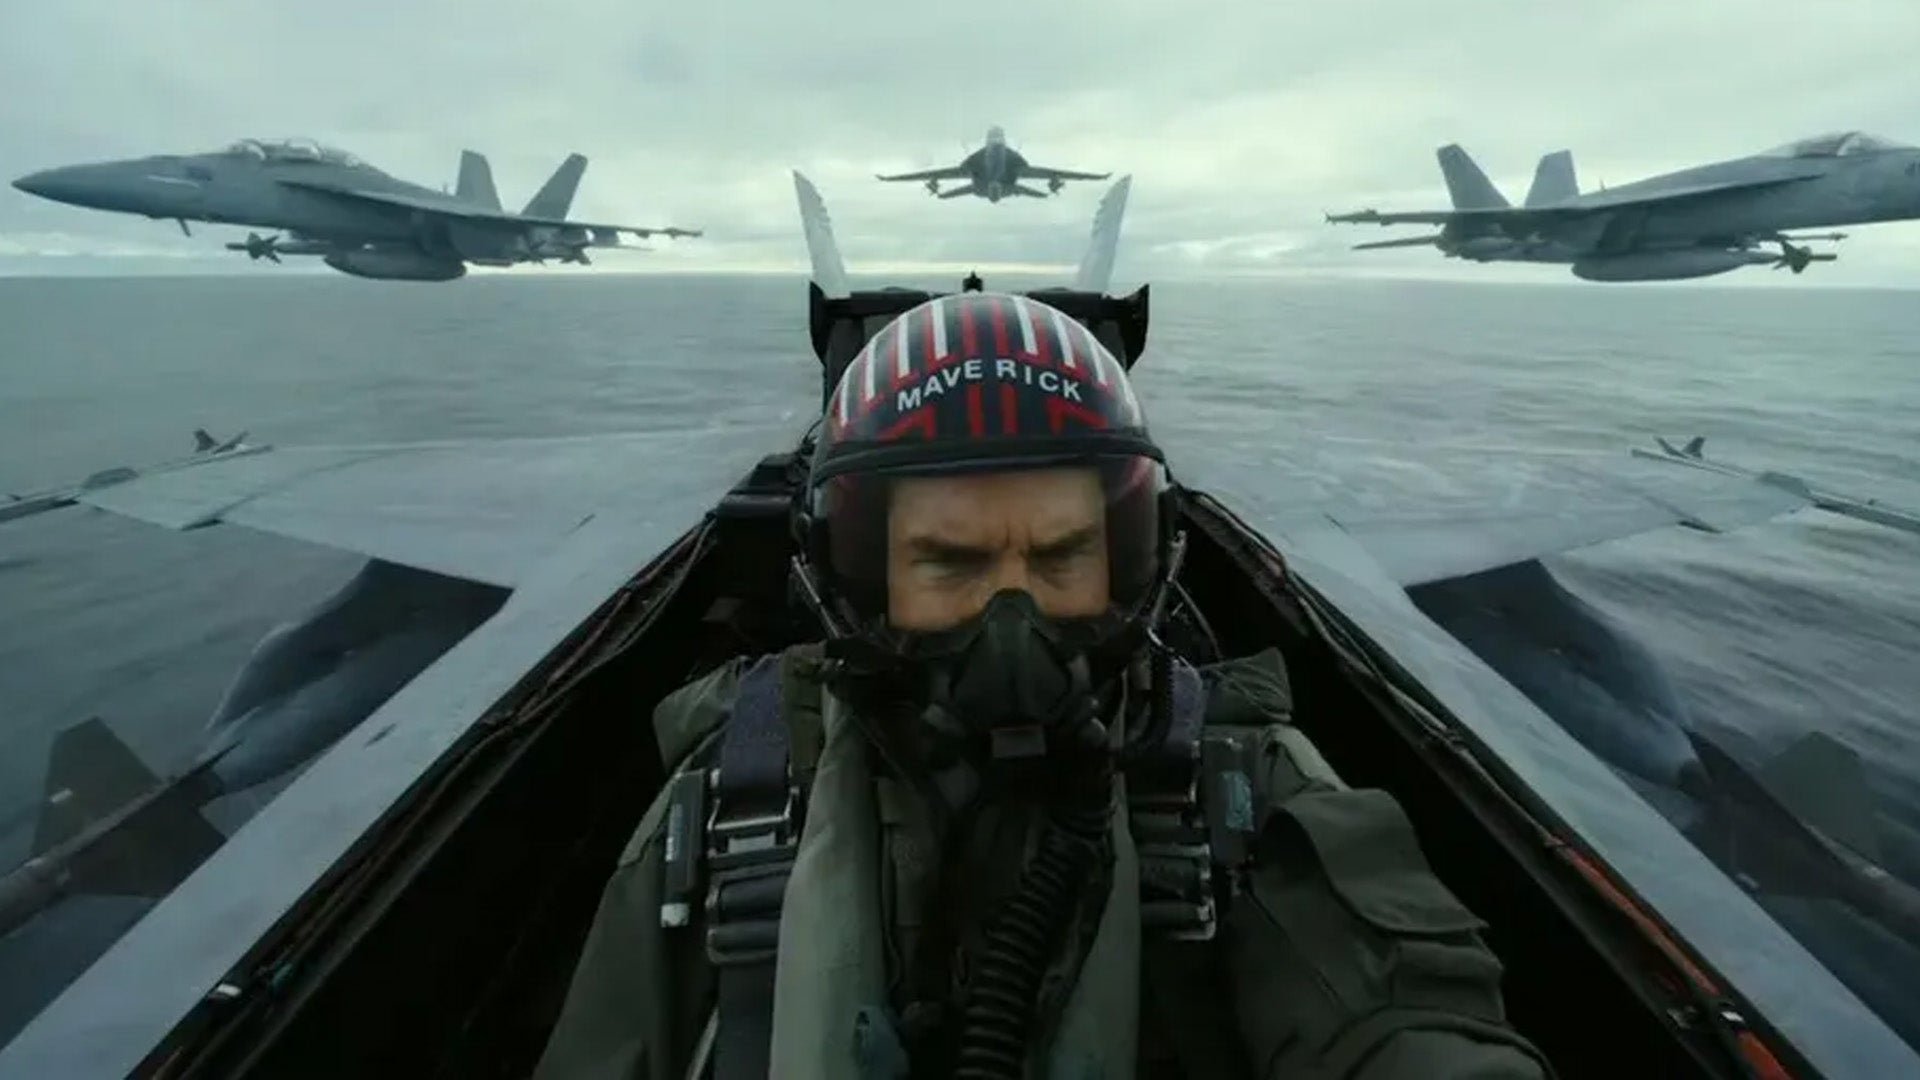 Top Gun: Maverick' review: Tom Cruise stars in this high-flying